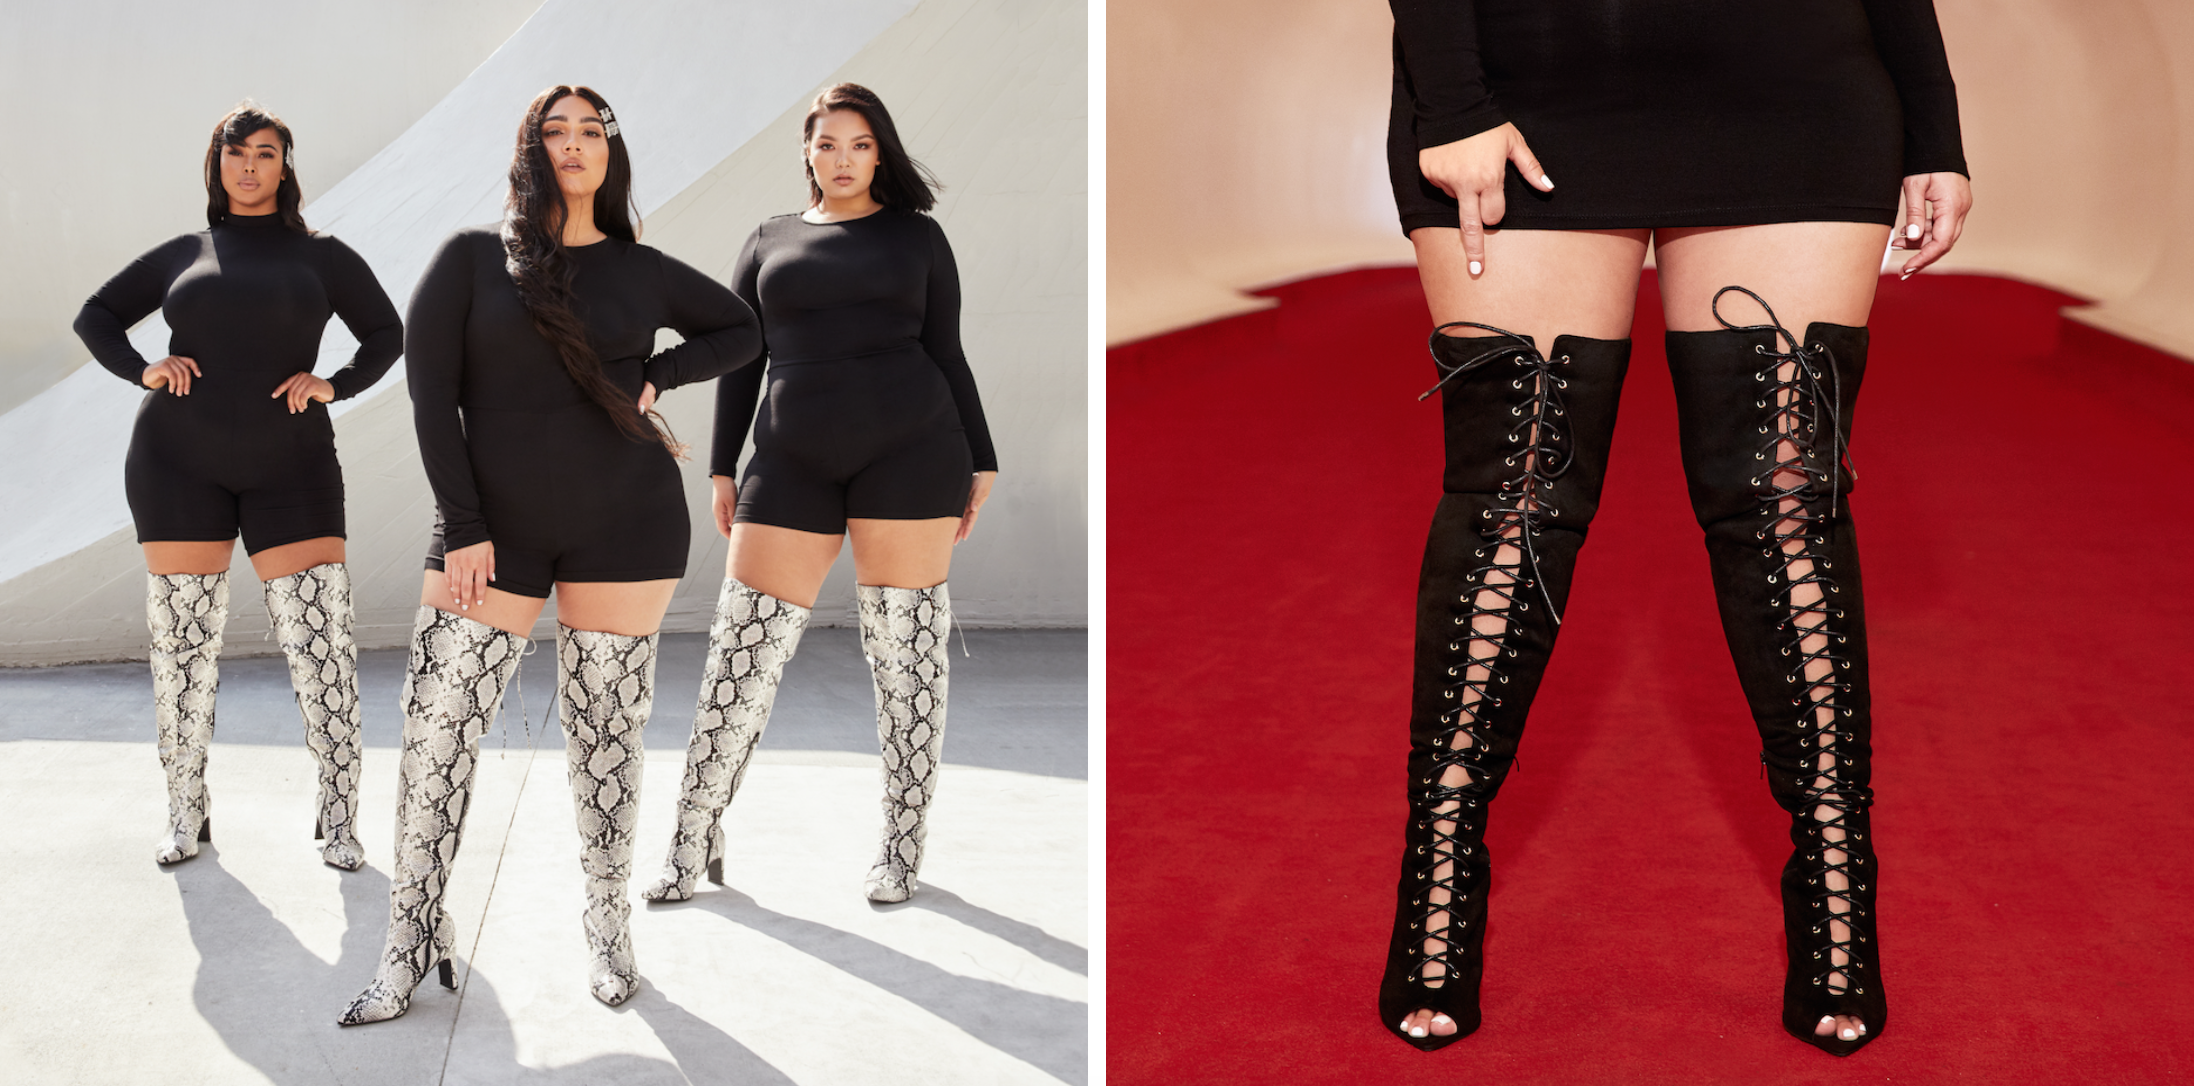 Details about  / Women/'s Chic Snake Skin Stiletto Thigh High Boots Over Knee High Boots Nightclub